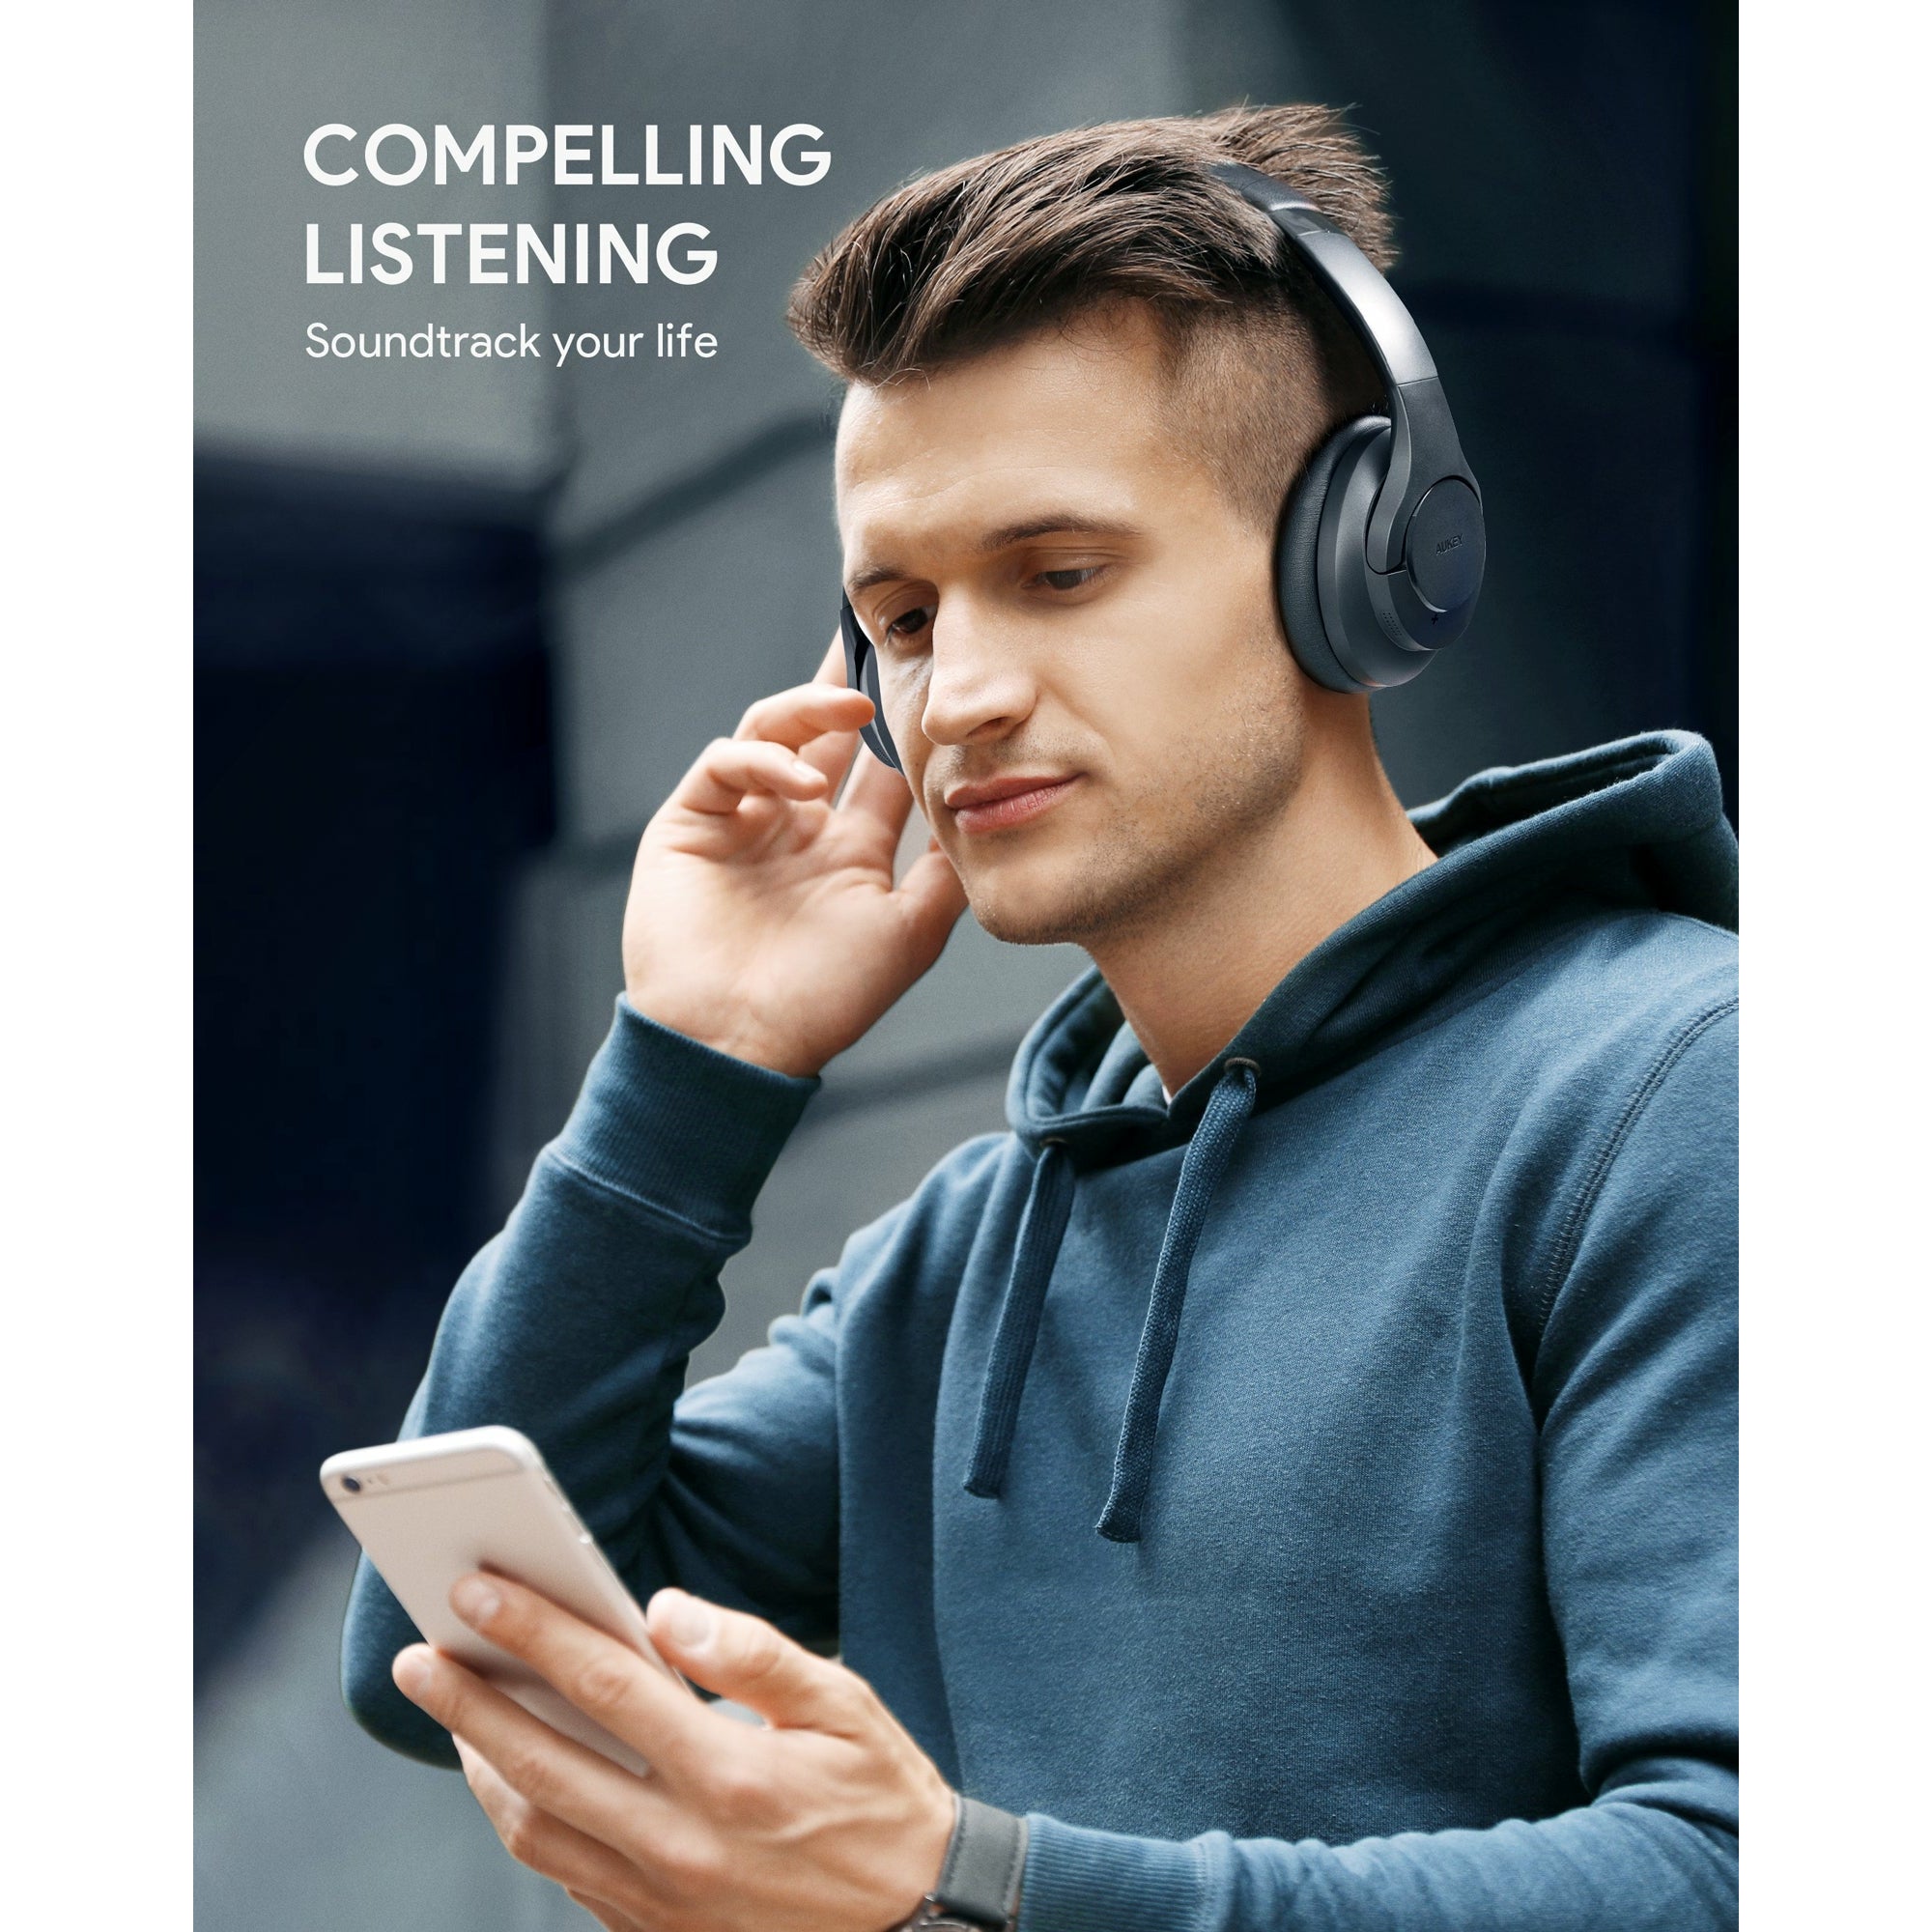 AUKEY EP-N12 Beyond Hybrid Active Noise Cancelling Headphones